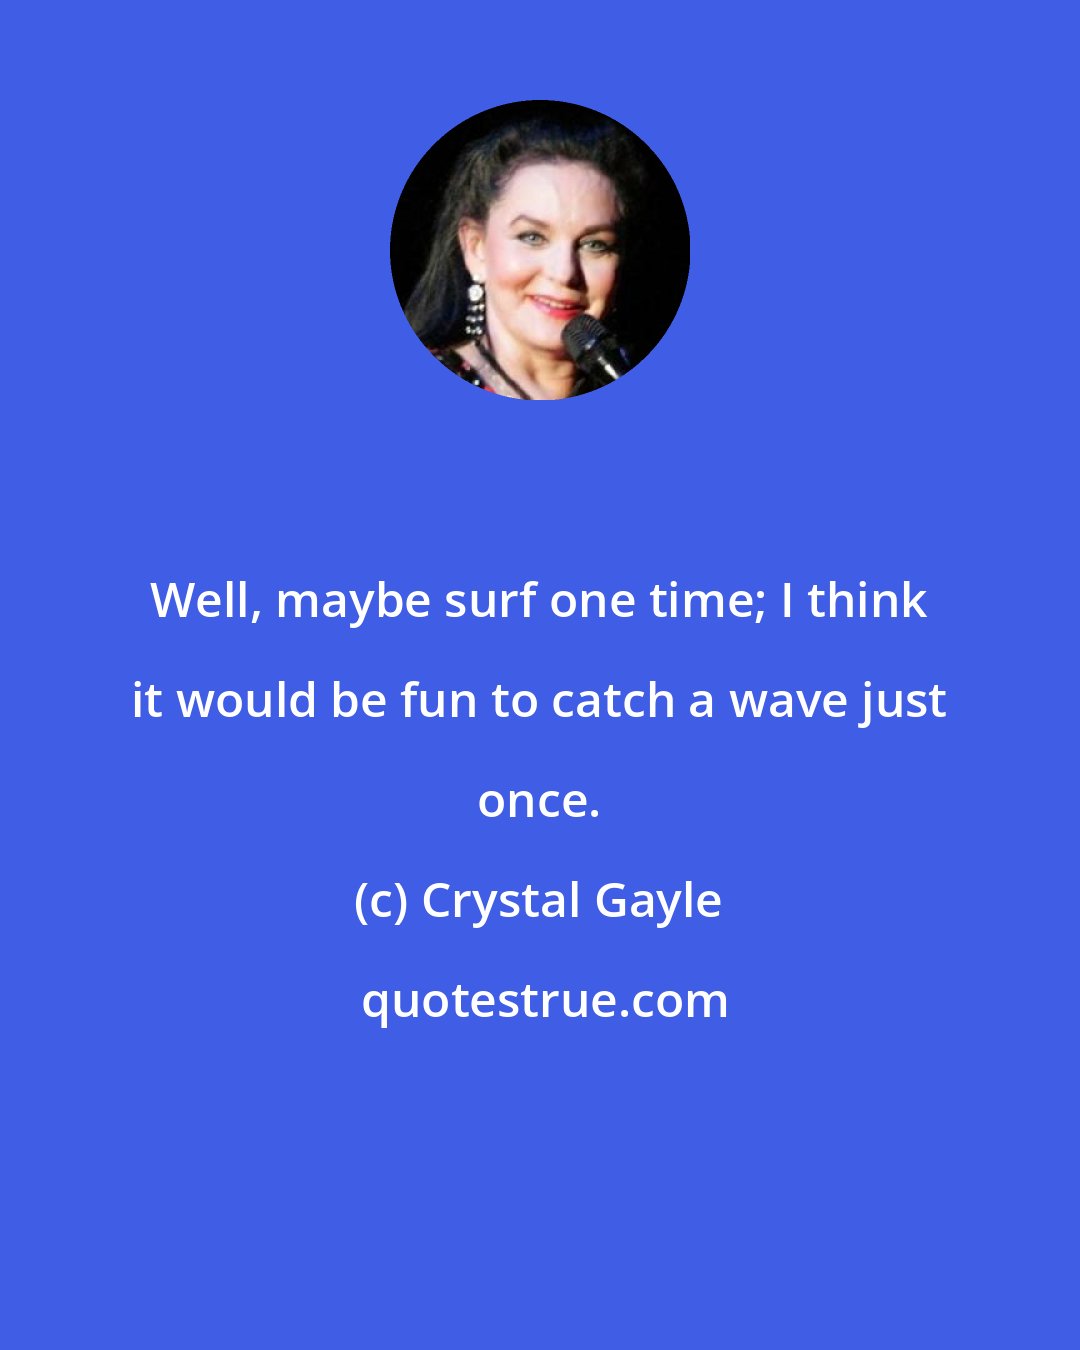 Crystal Gayle: Well, maybe surf one time; I think it would be fun to catch a wave just once.